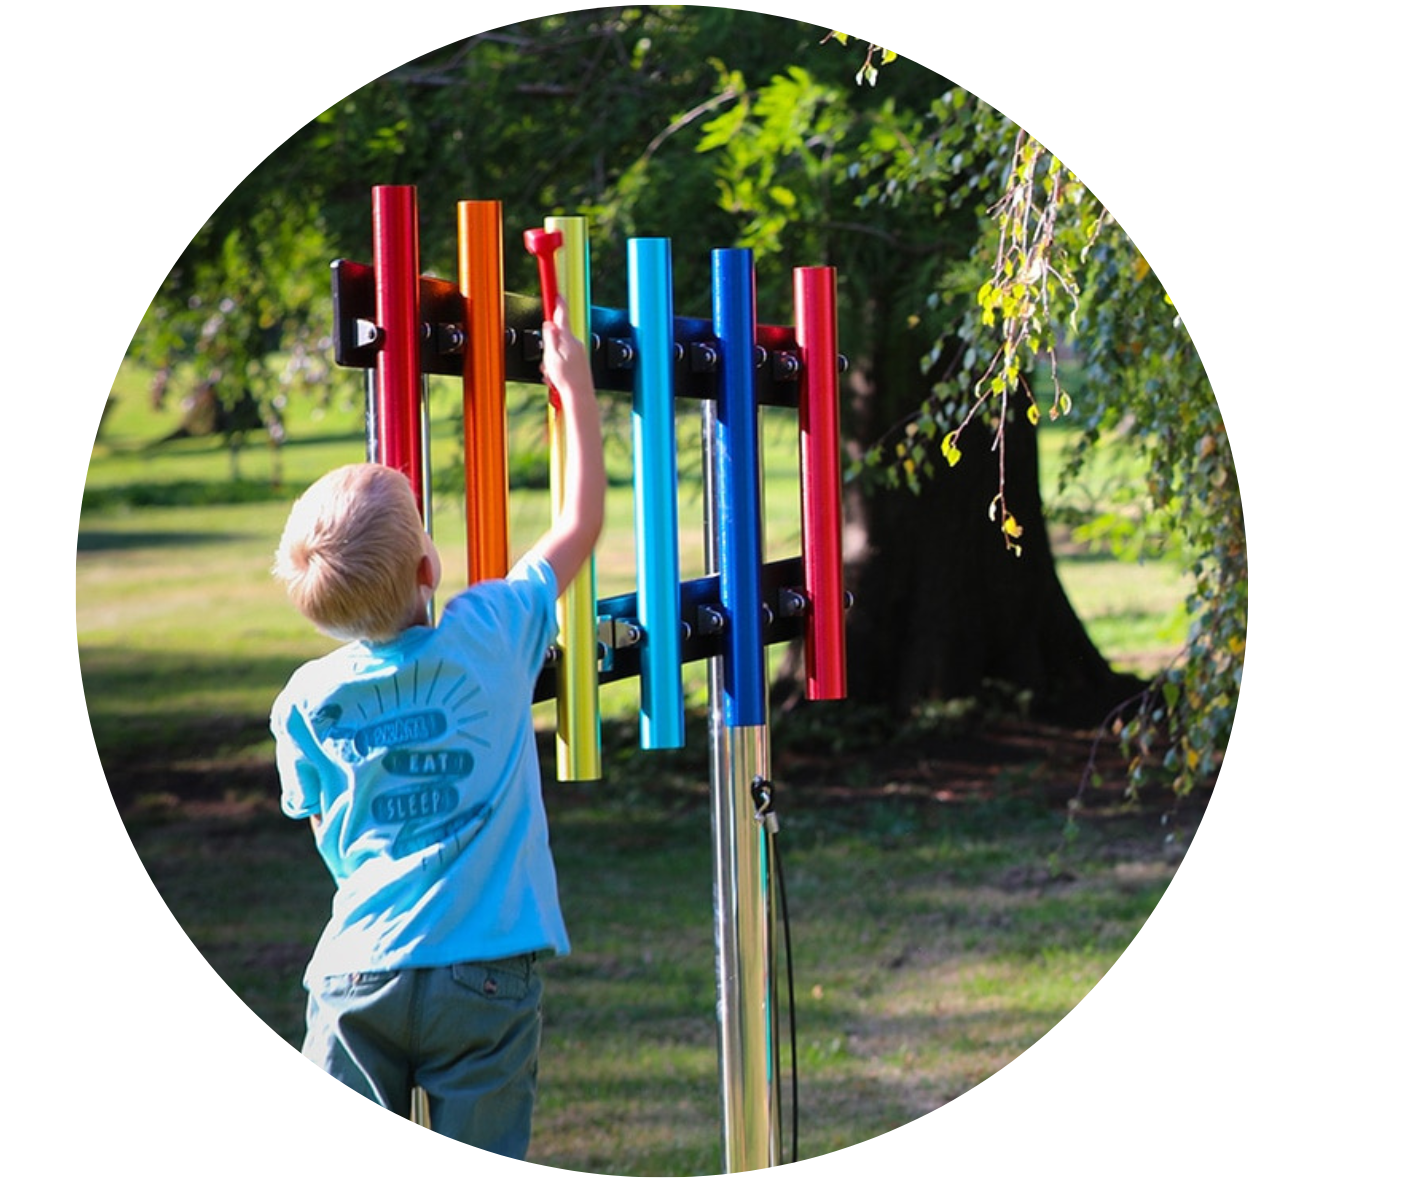 Blonde child in a light blue t-shirt playing with a xylophone set in the park. The xylophone is red, orange, pink, yellow, light blue, and dark blue.